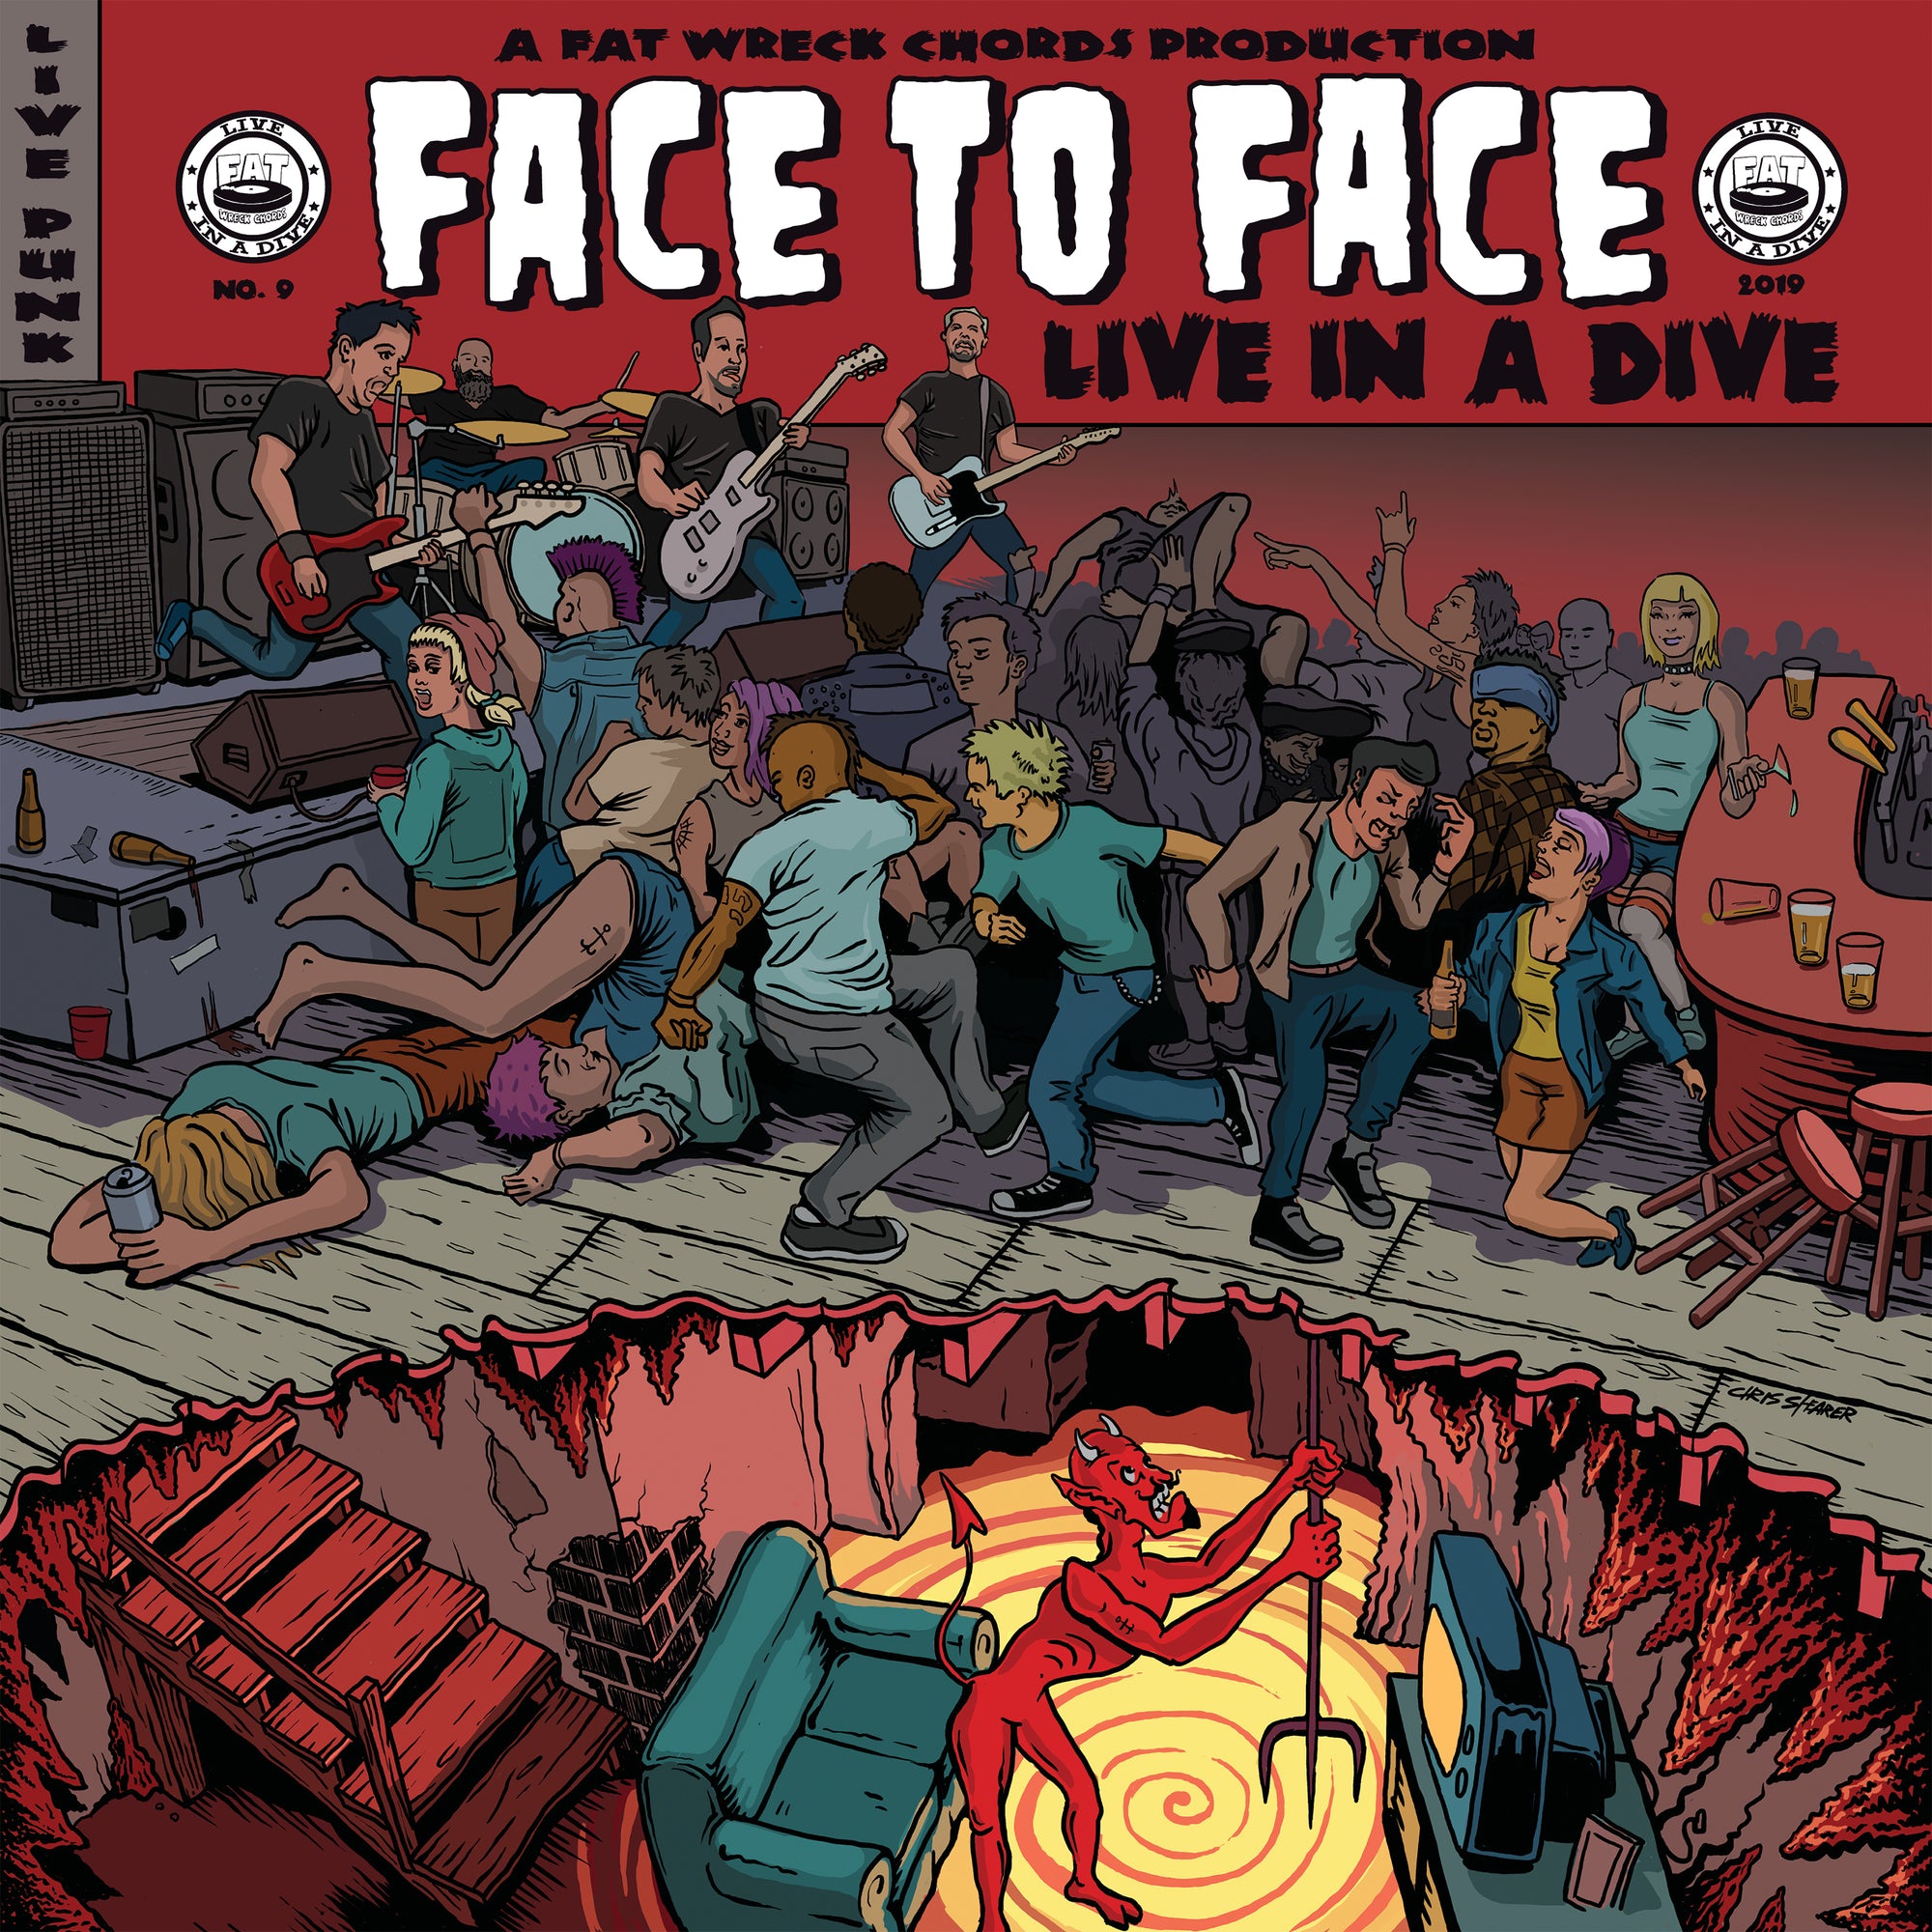 Live in a Dive: face to face